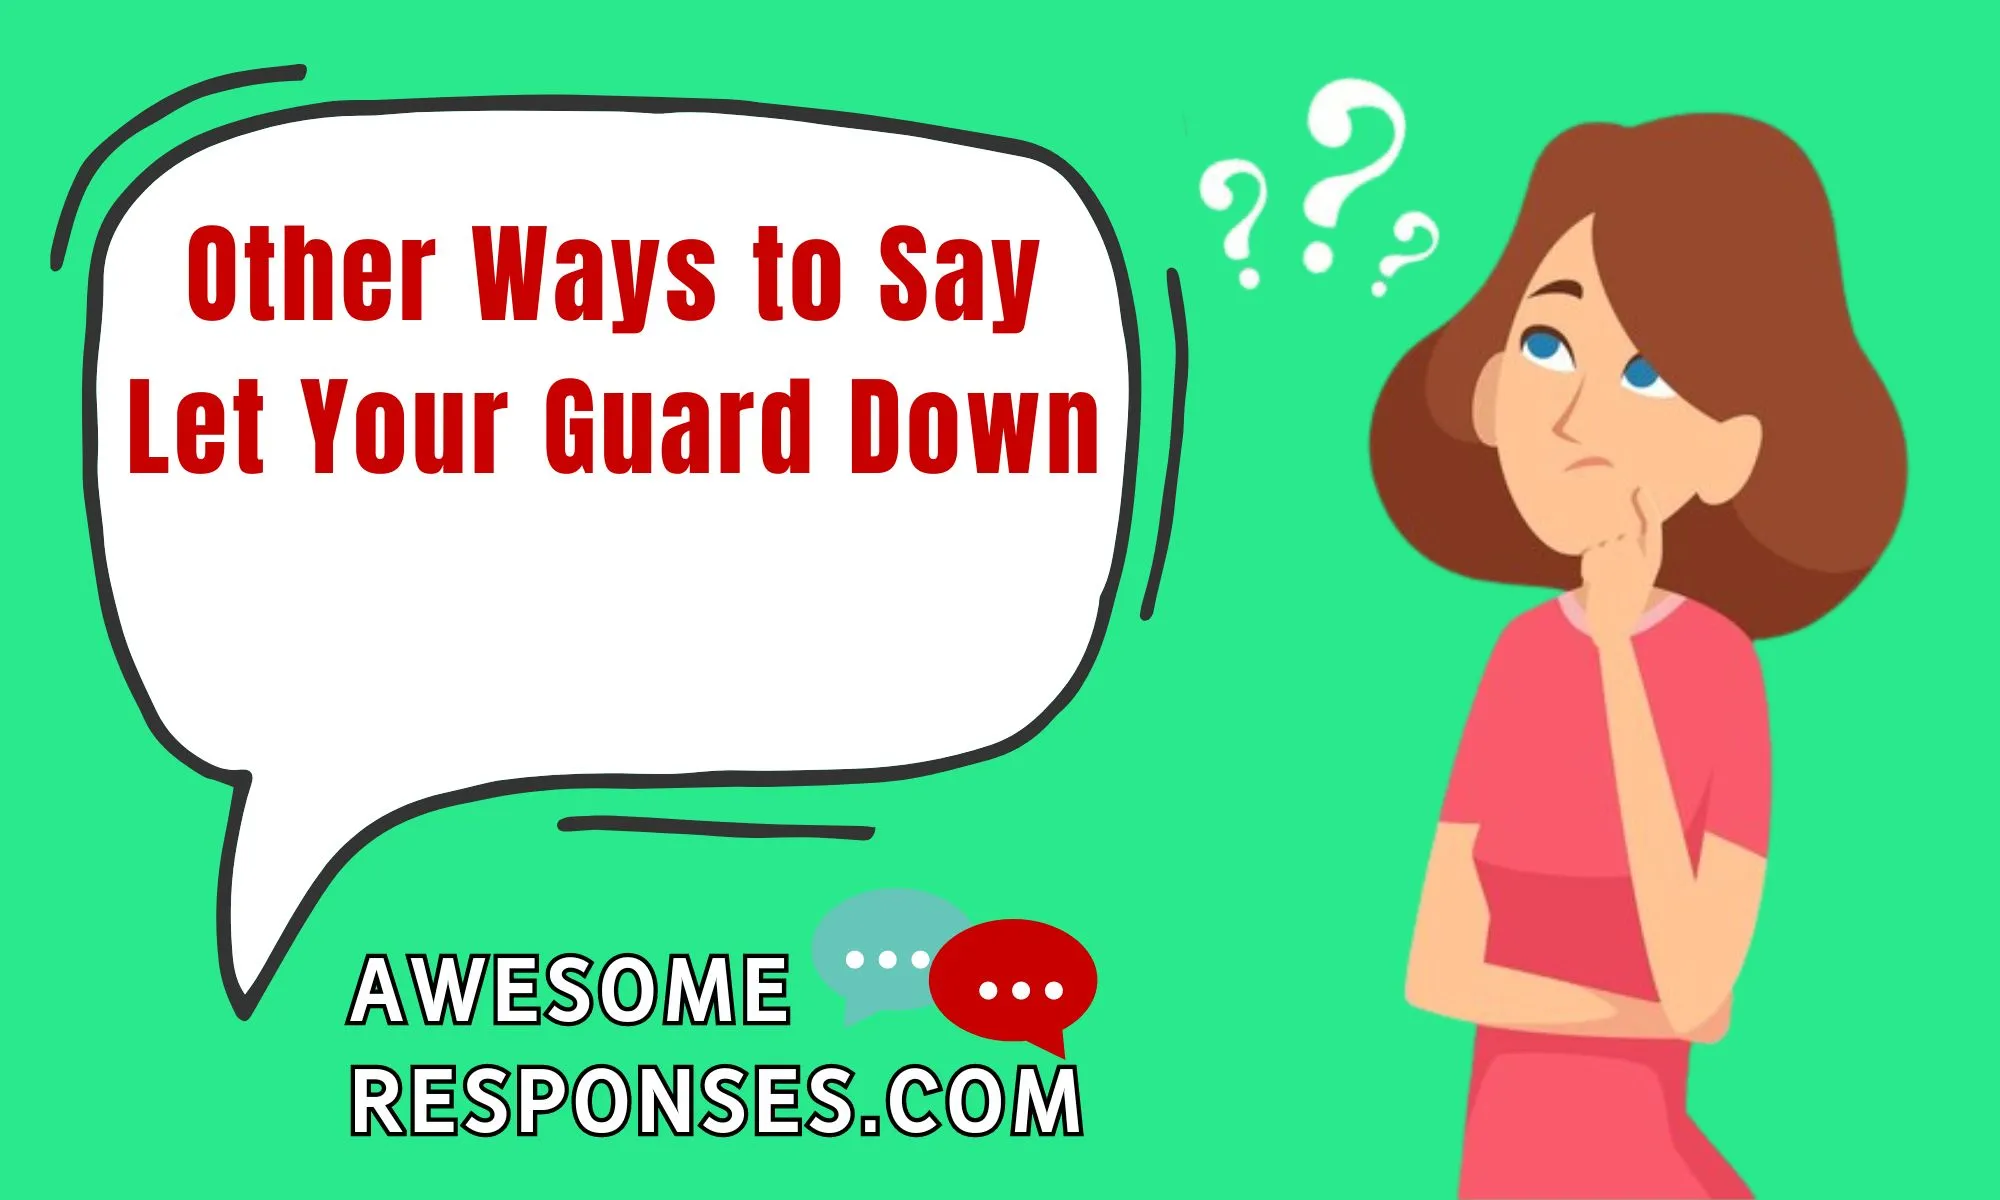 Other Ways to Say Let Your Guard Down